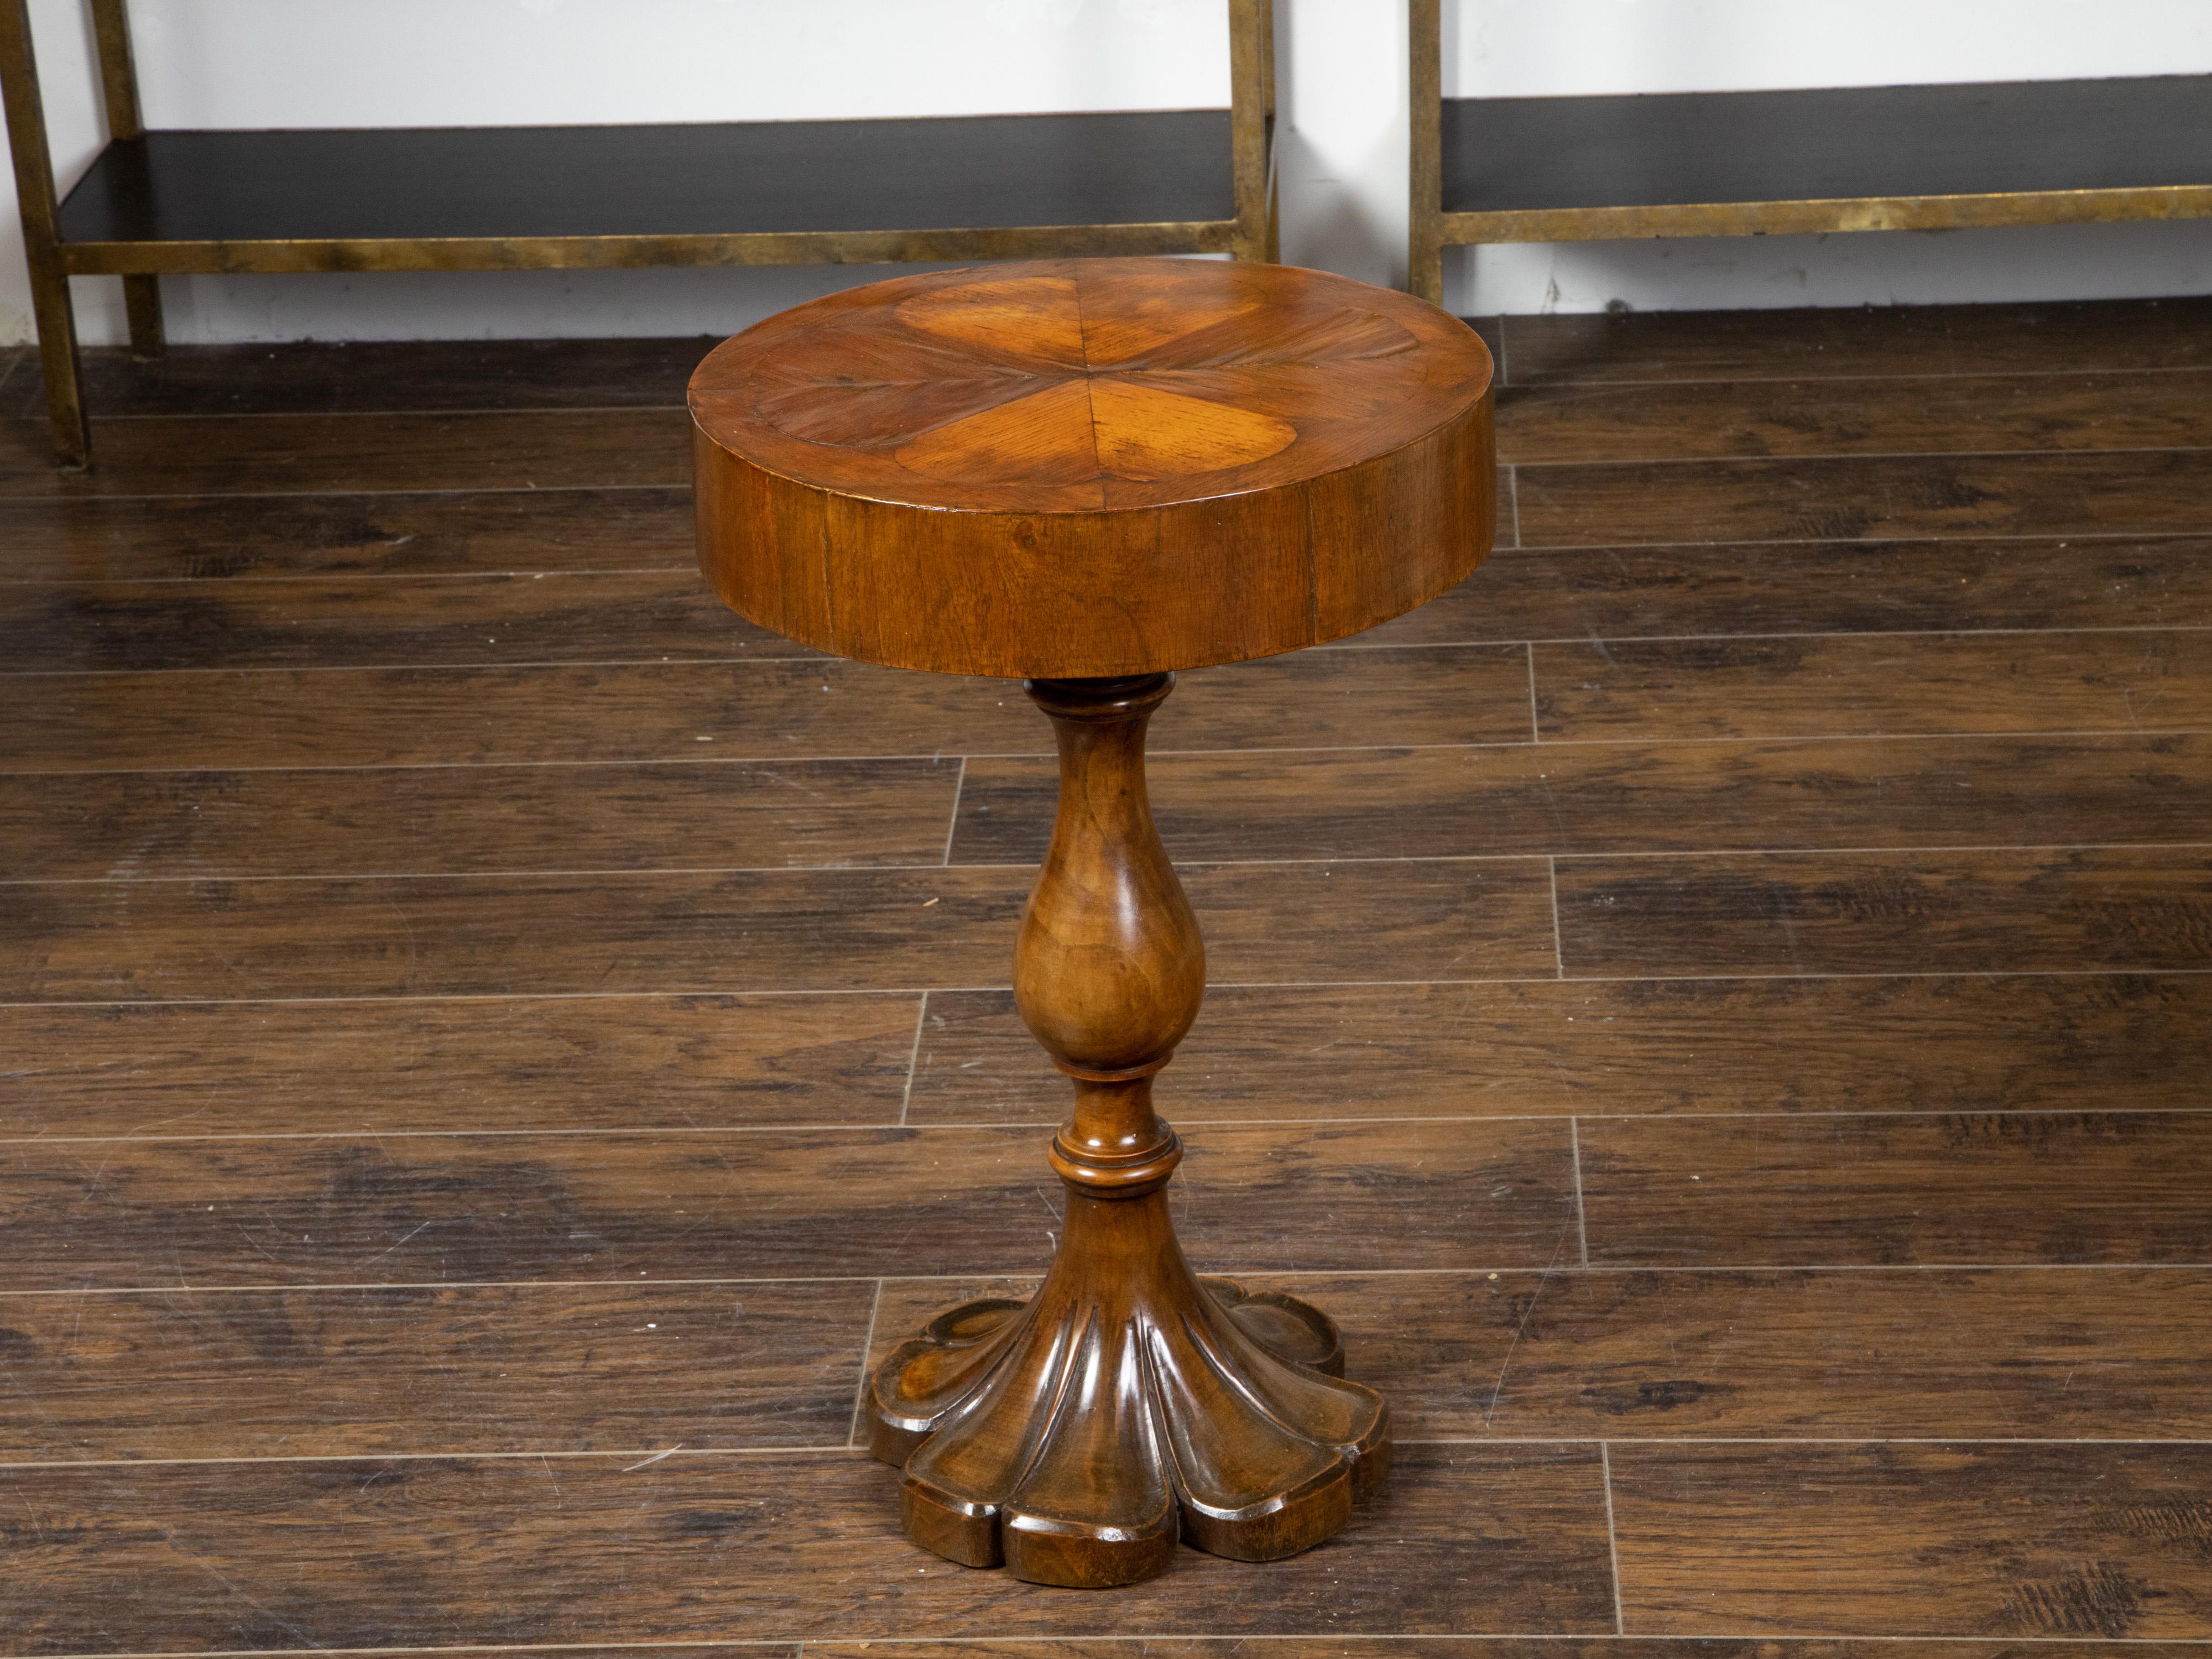 Inlay Italian 19th Century Walnut Pedestal Side Table with Heart-Shape Inlaid Top